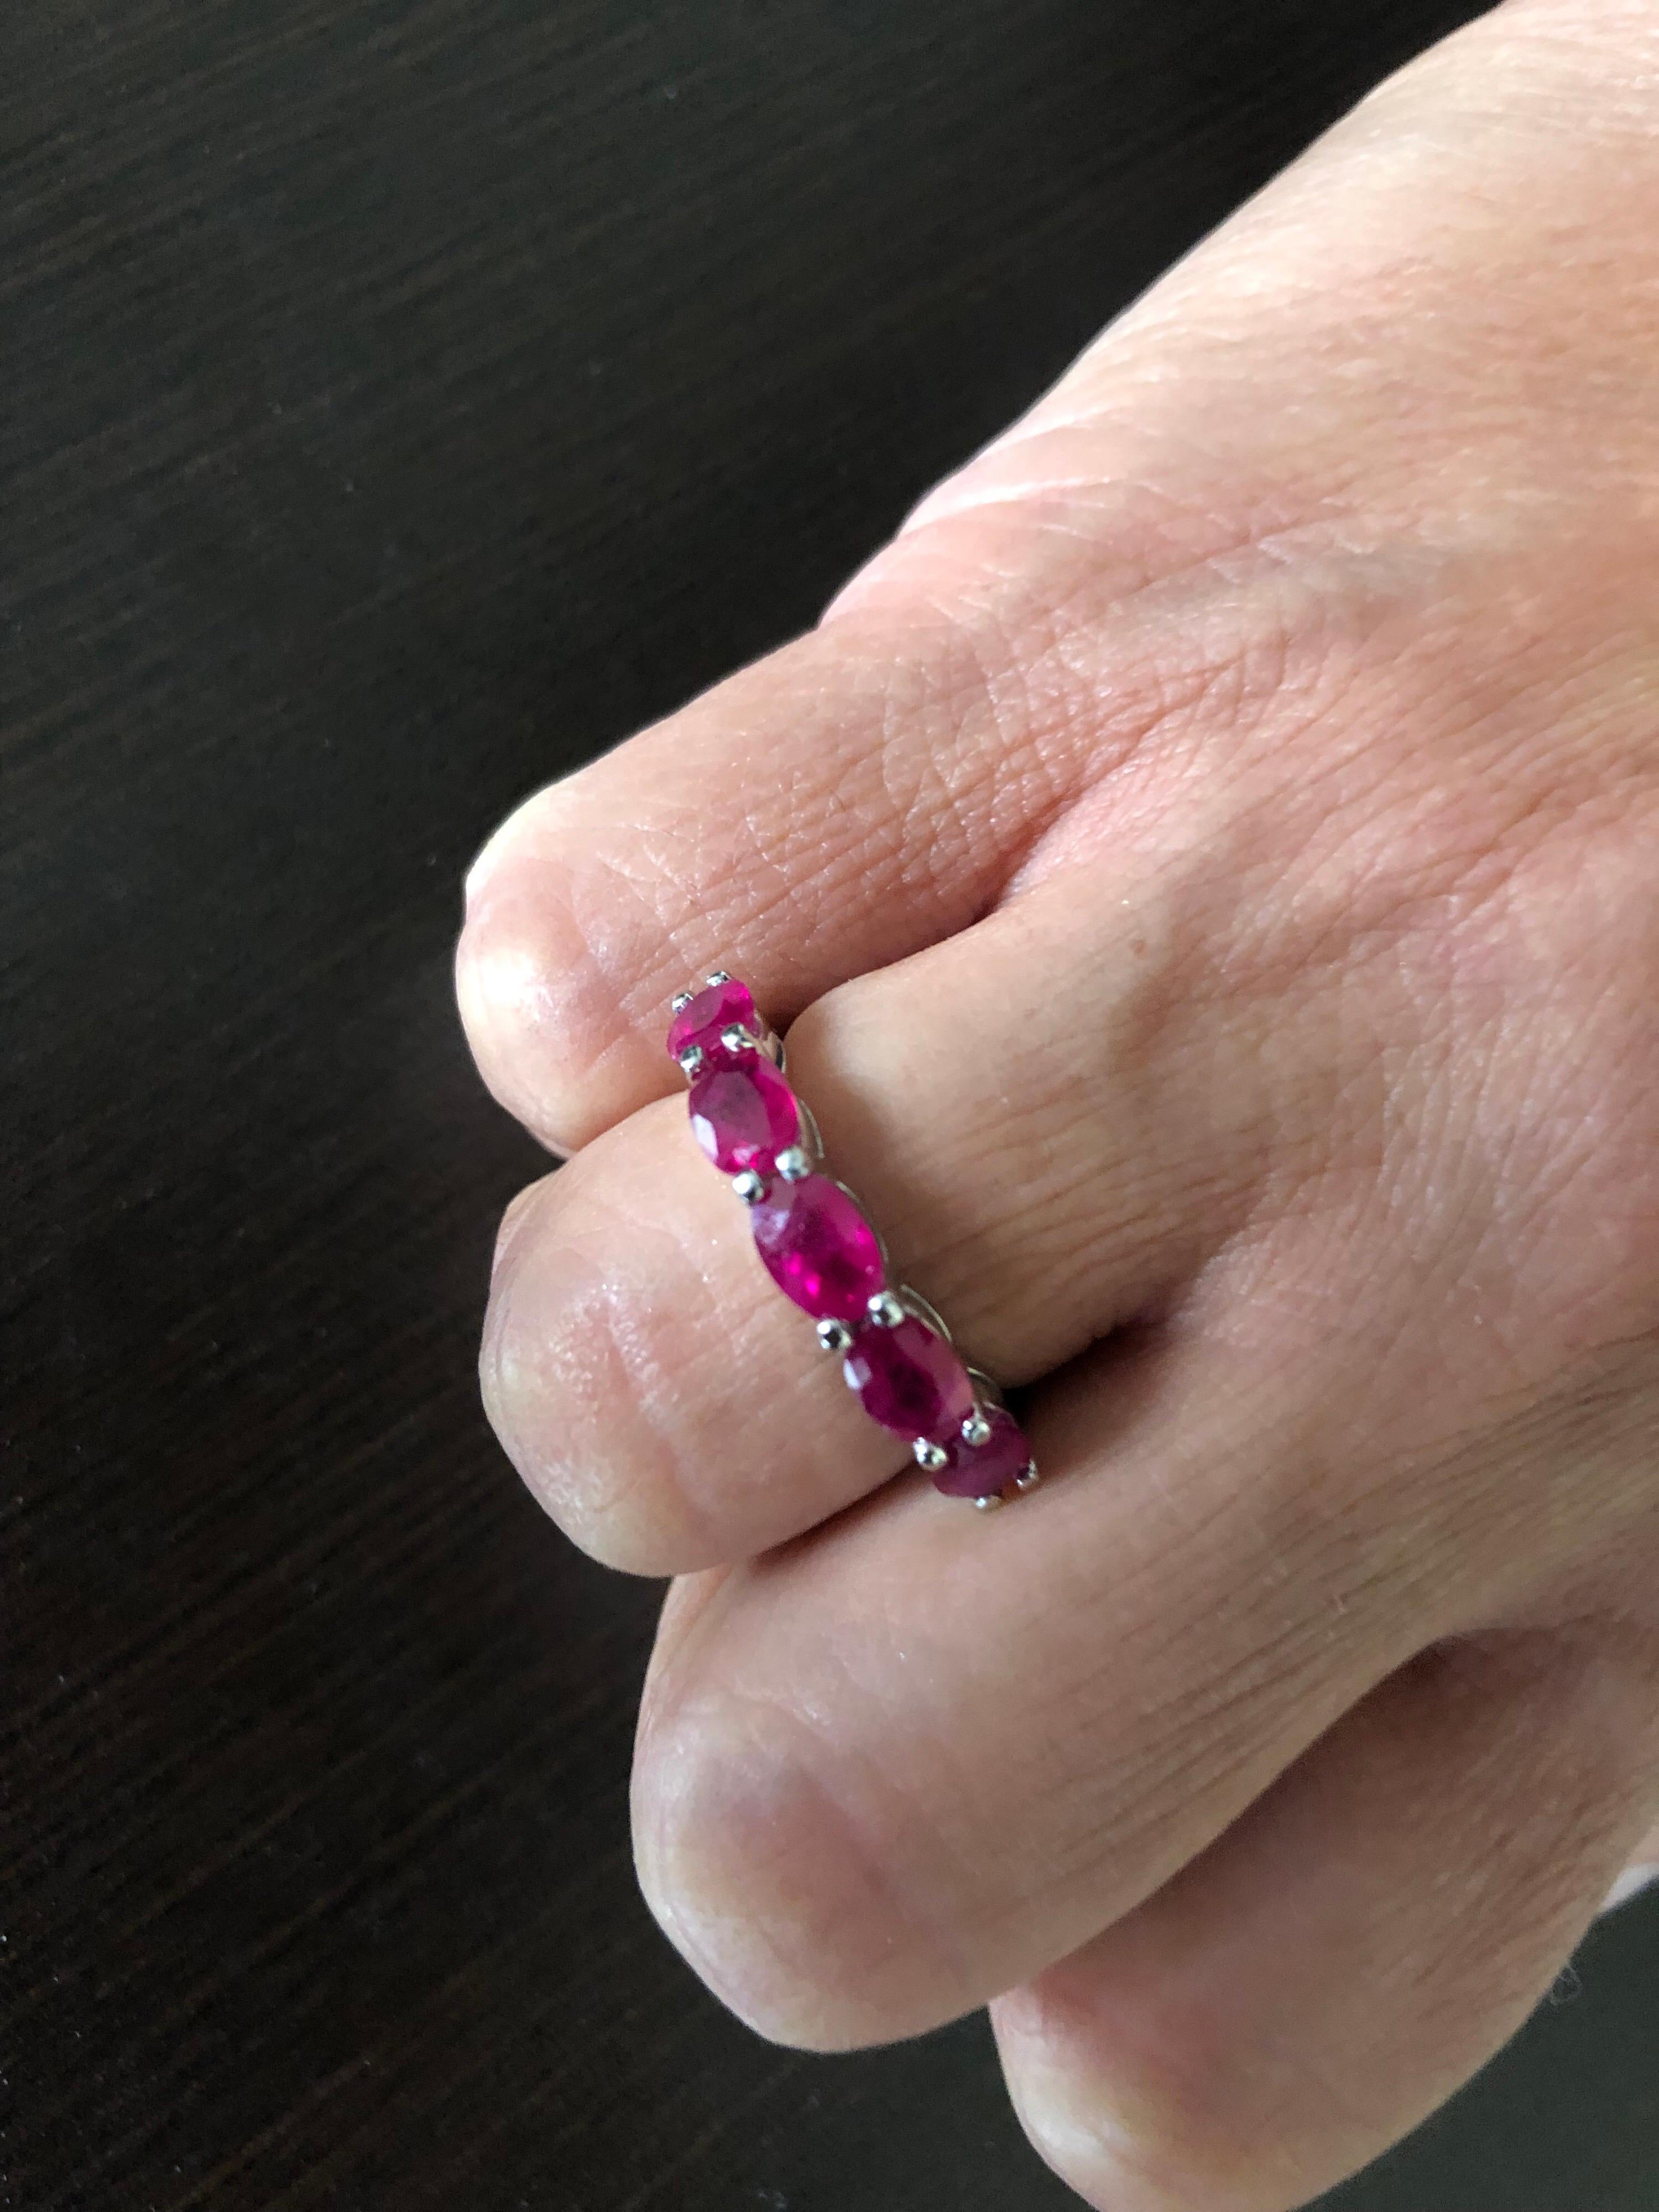 5 stone Oval Ruby ring set in 14K White gold. The oval stones weigh approximately 0.65 carats each. The total weight is 3.25 carats. The ruby stones are Burma. The ring is a size 6.5 and can be sized.